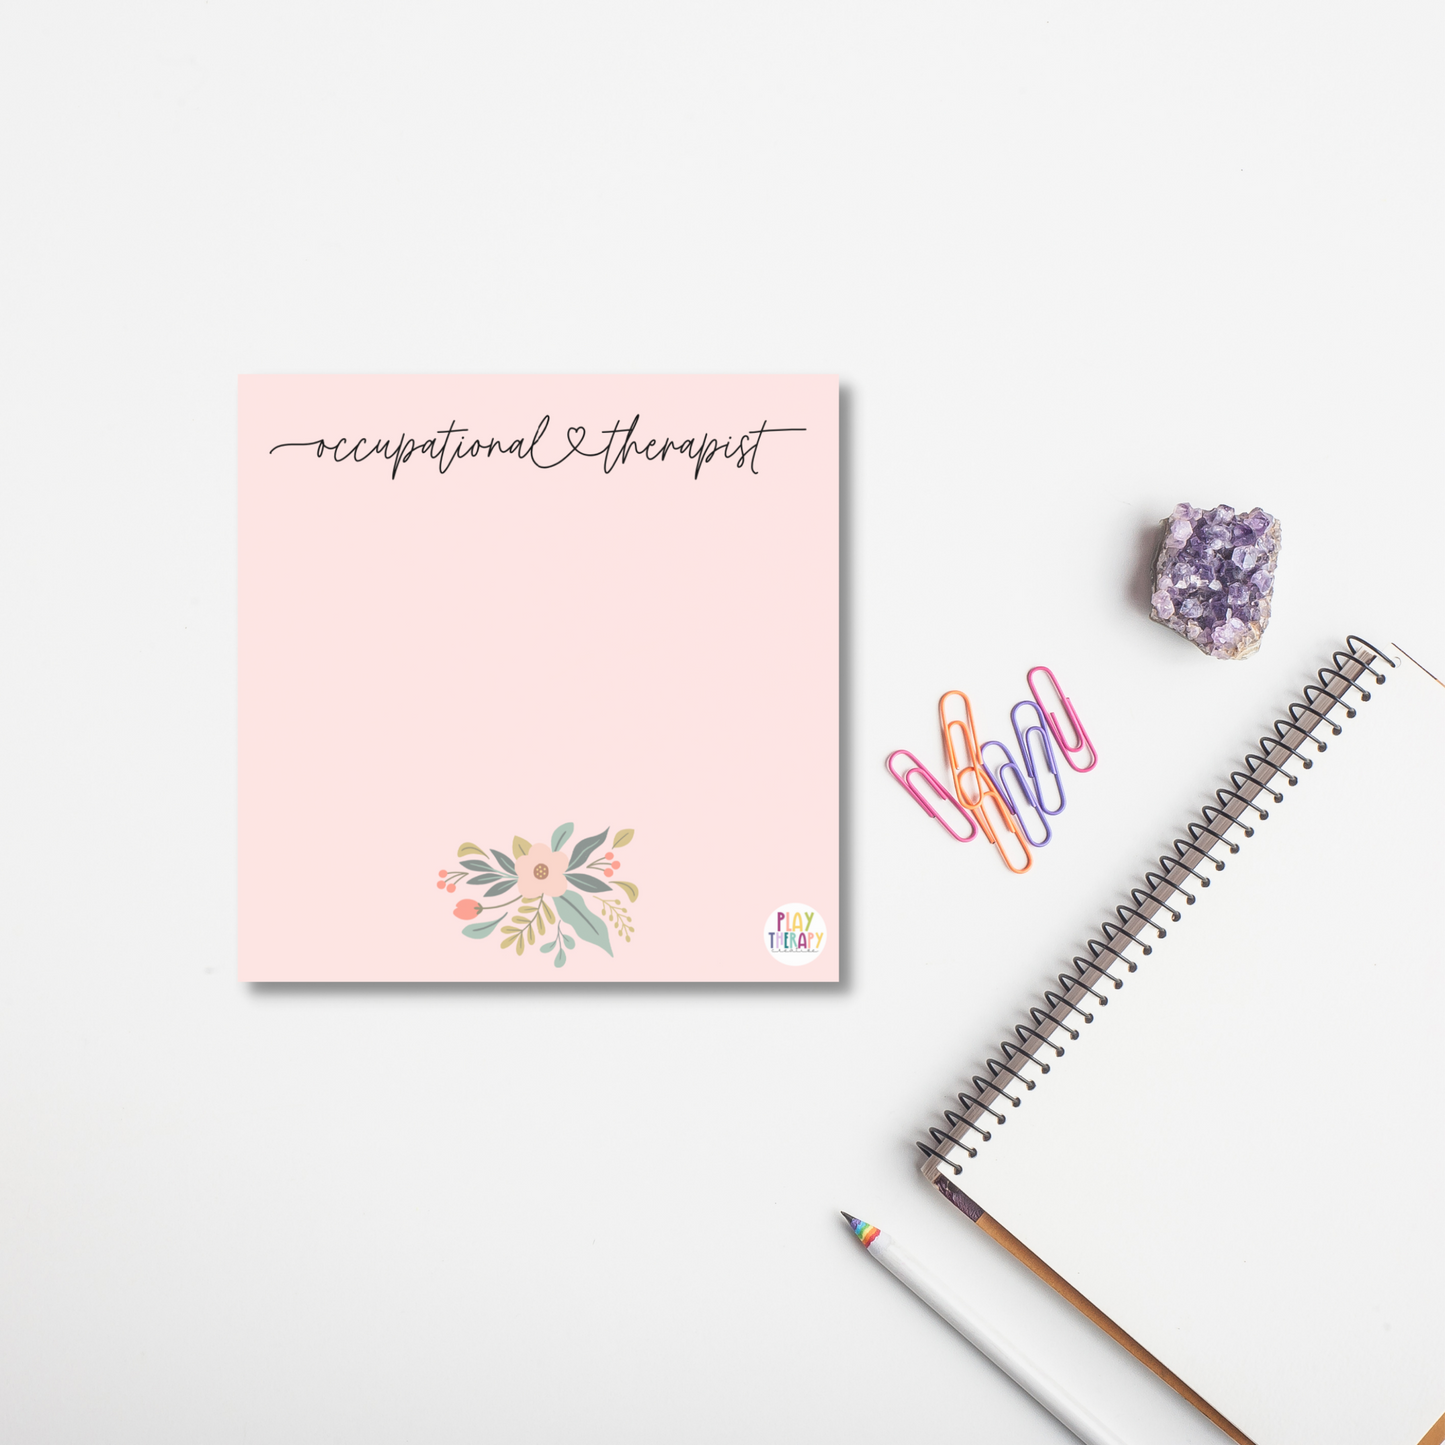 Occupational Therapist Floral Sticky Notes